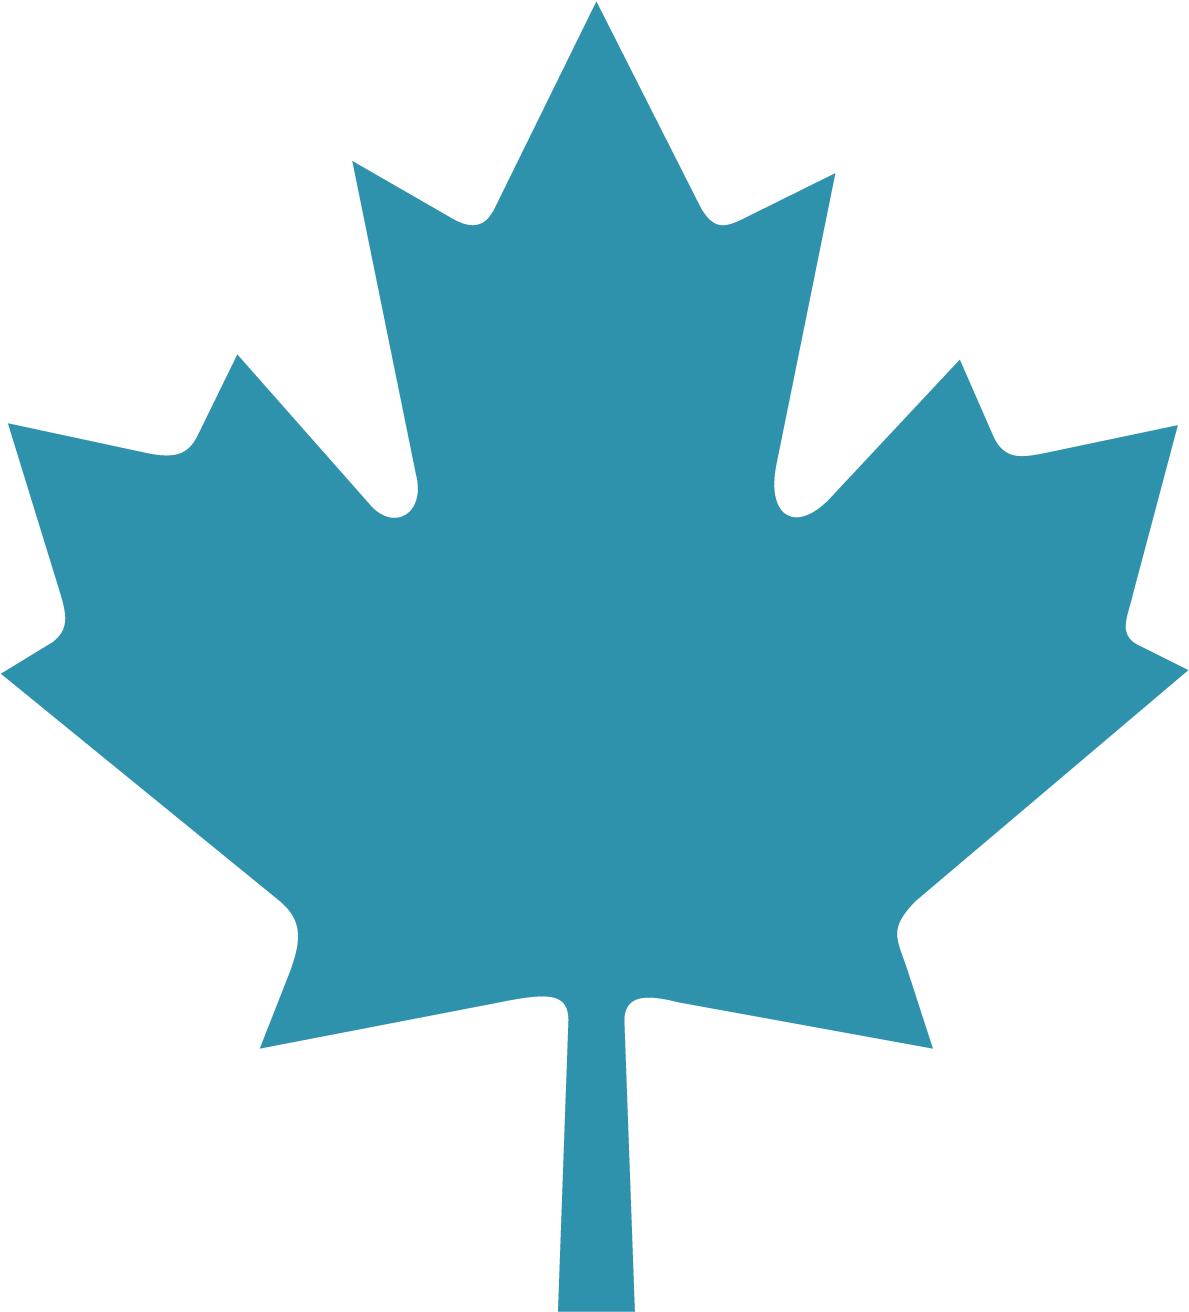 Canadian Cities - Red Canadian Maple Leaf (1668x1667)